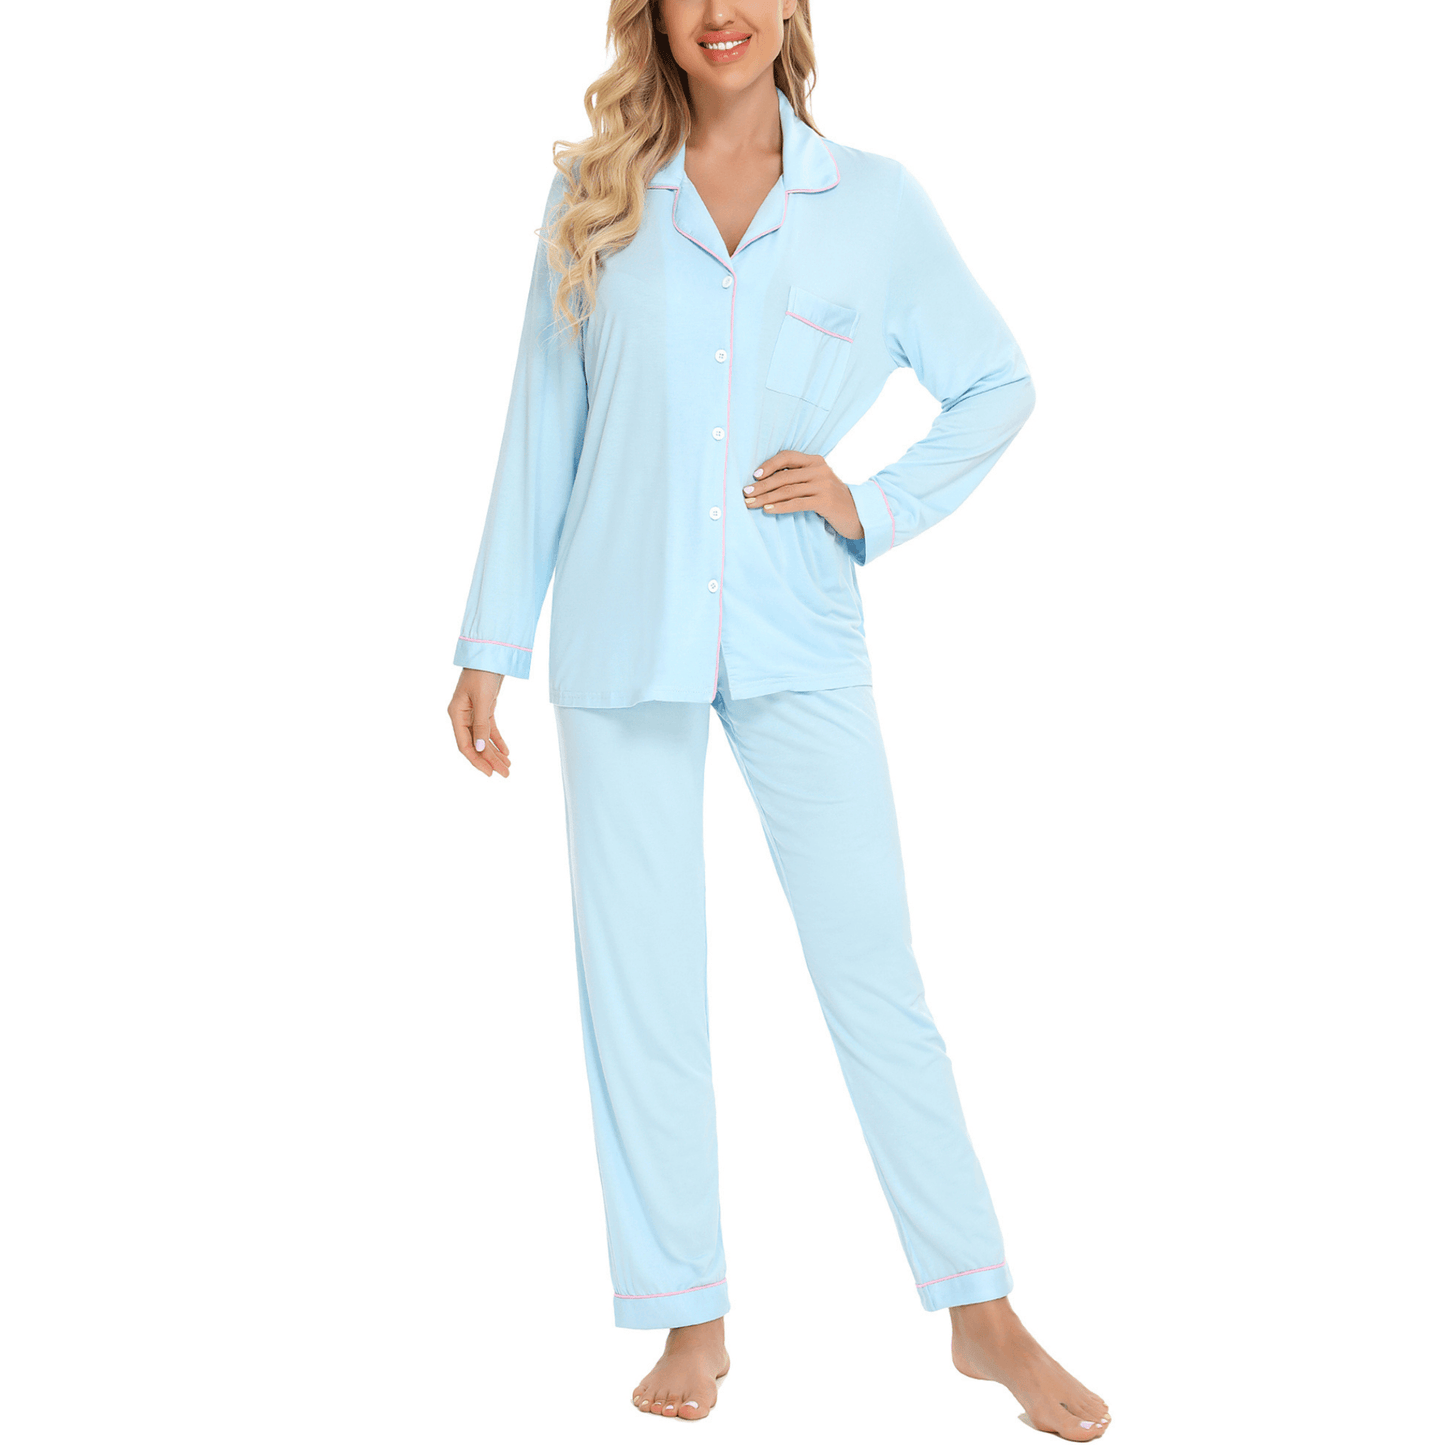 Long sleeve Baby Blue and Pink pyjamas in silky soft bamboo viscose, finished with pink contrast piping and drawstring.